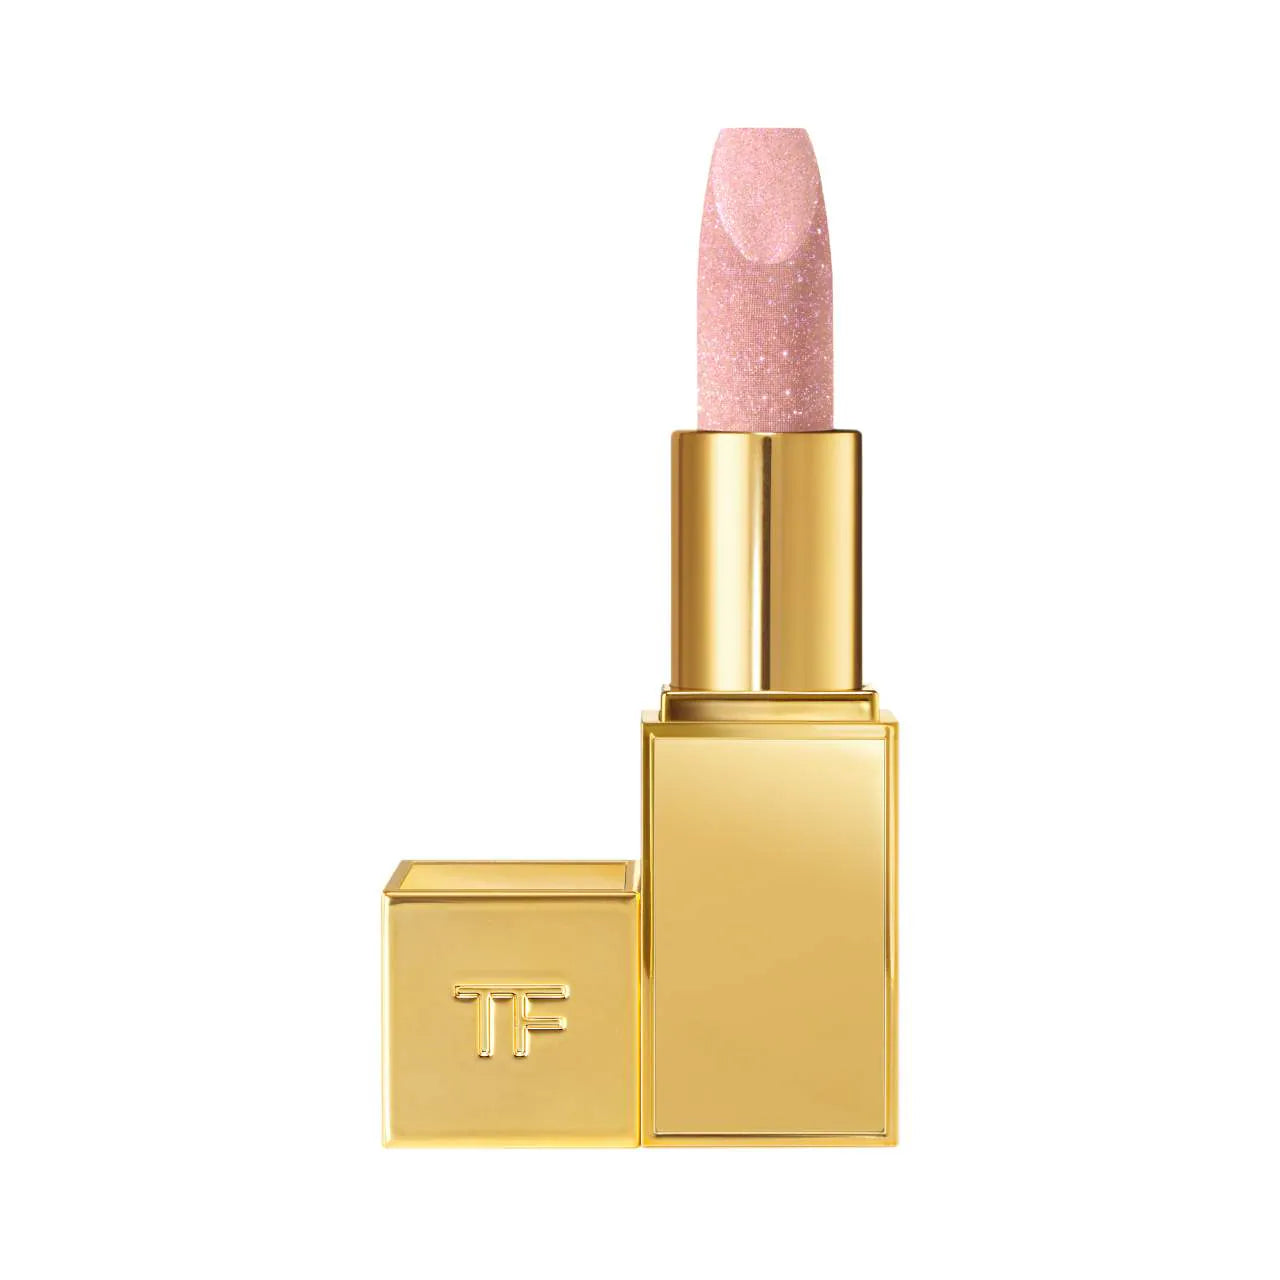 Tom Ford Beauty Soleil Lip Duo